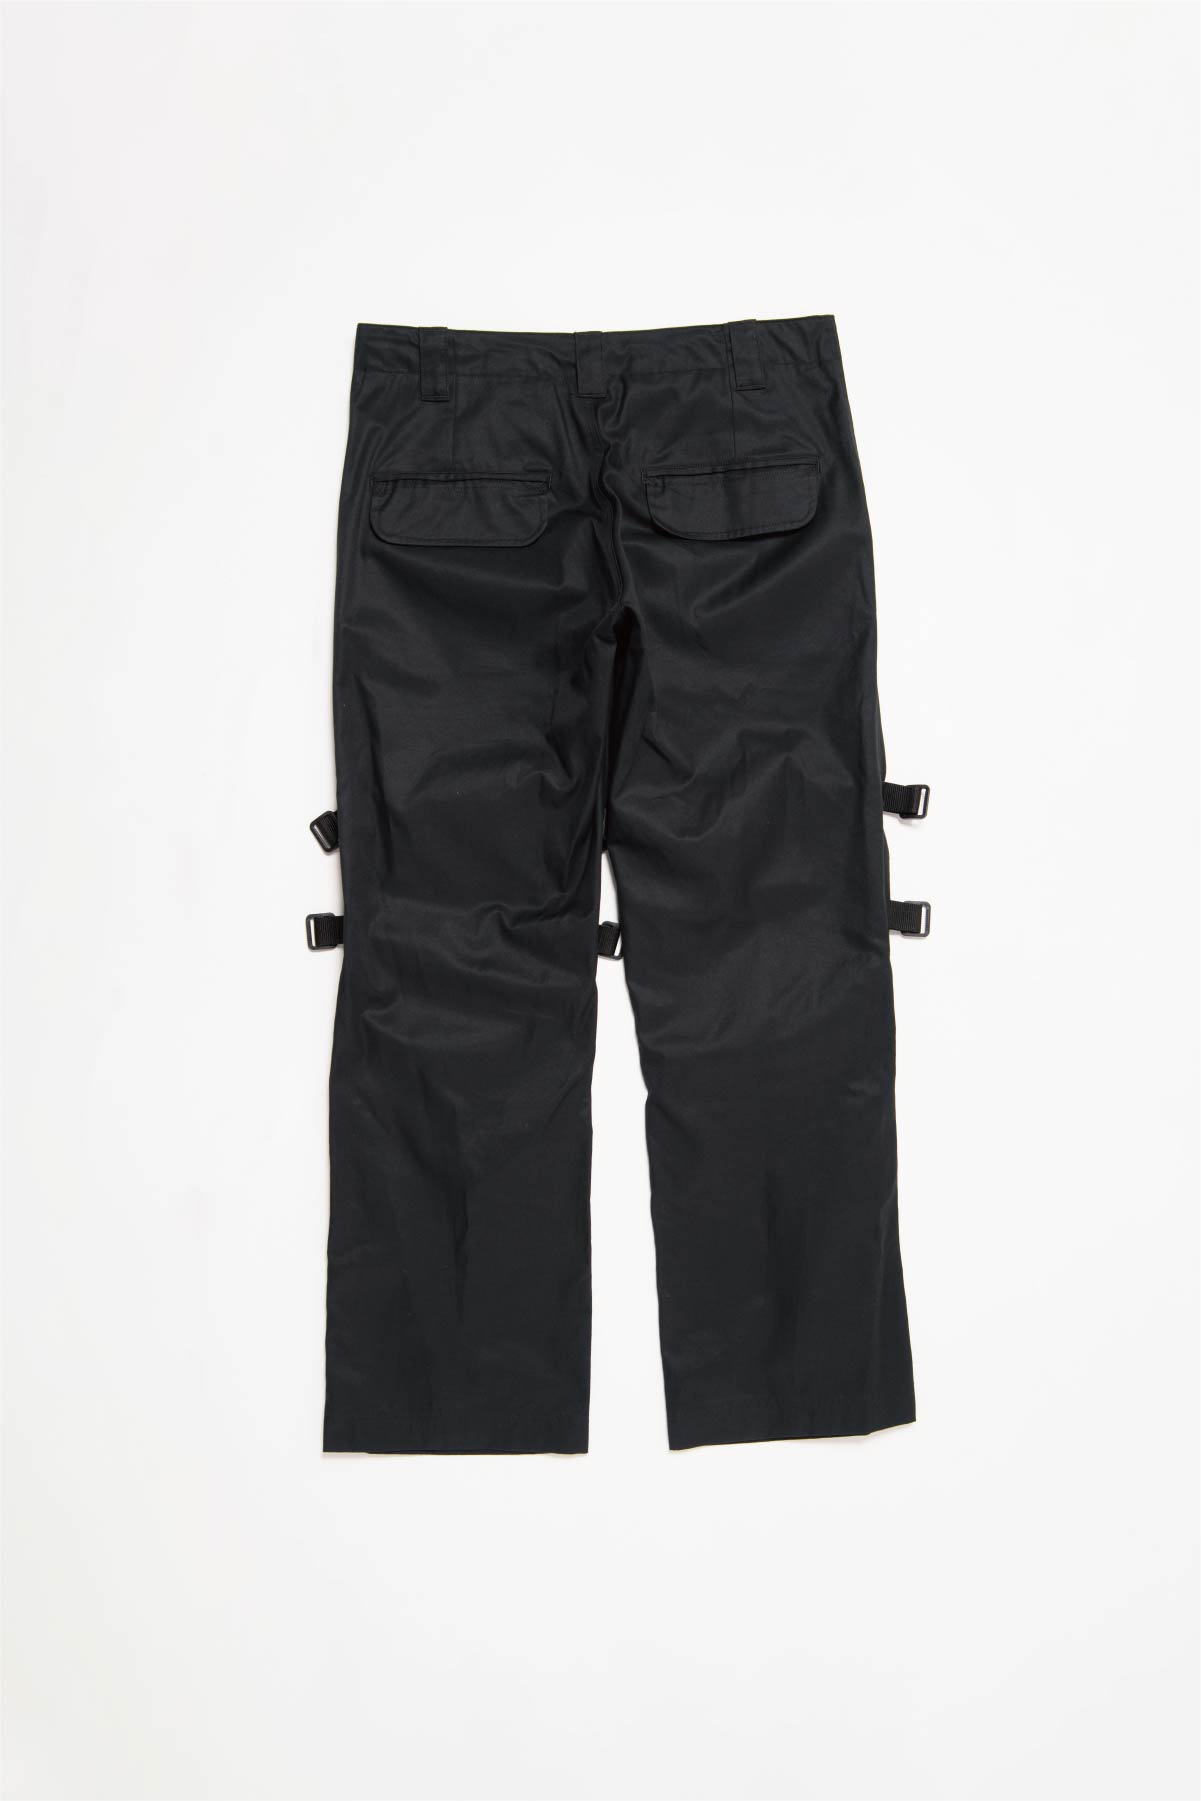 【Made to Order】　Cargo pants + Leg cover Set